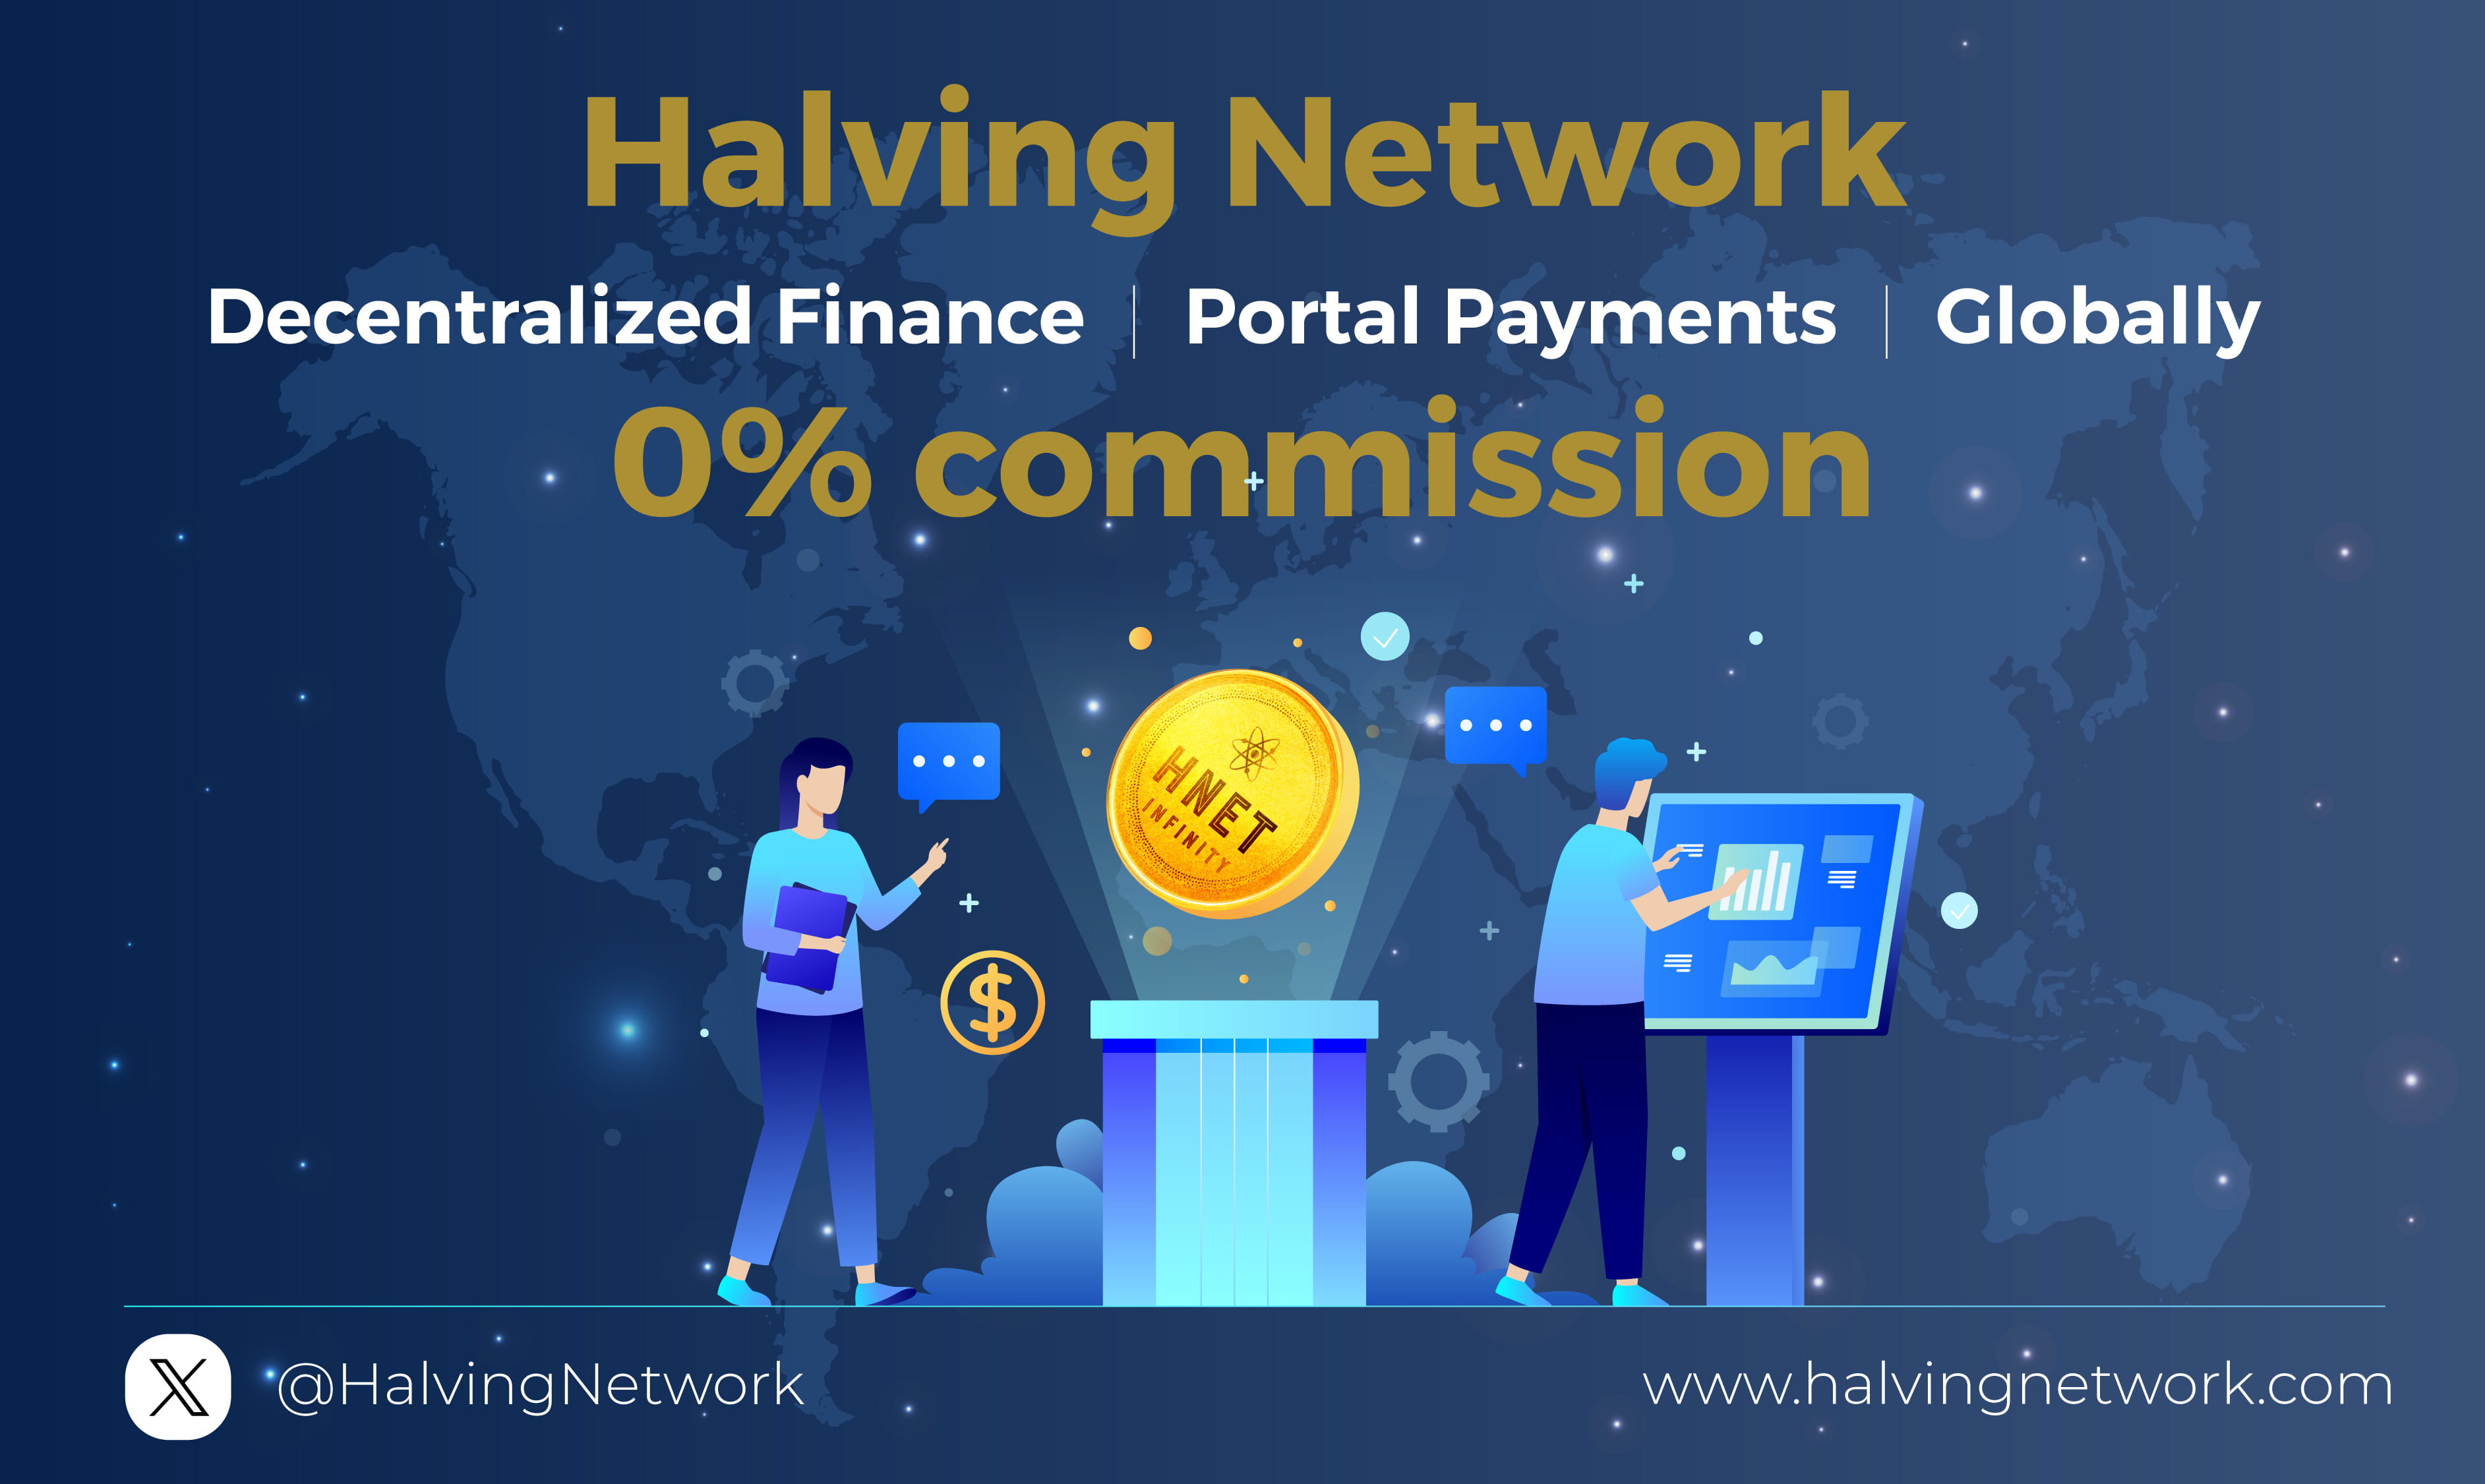 HALVING NETWORK GLOBALLY PAYMENTS WITH LOWEST FEES EVER